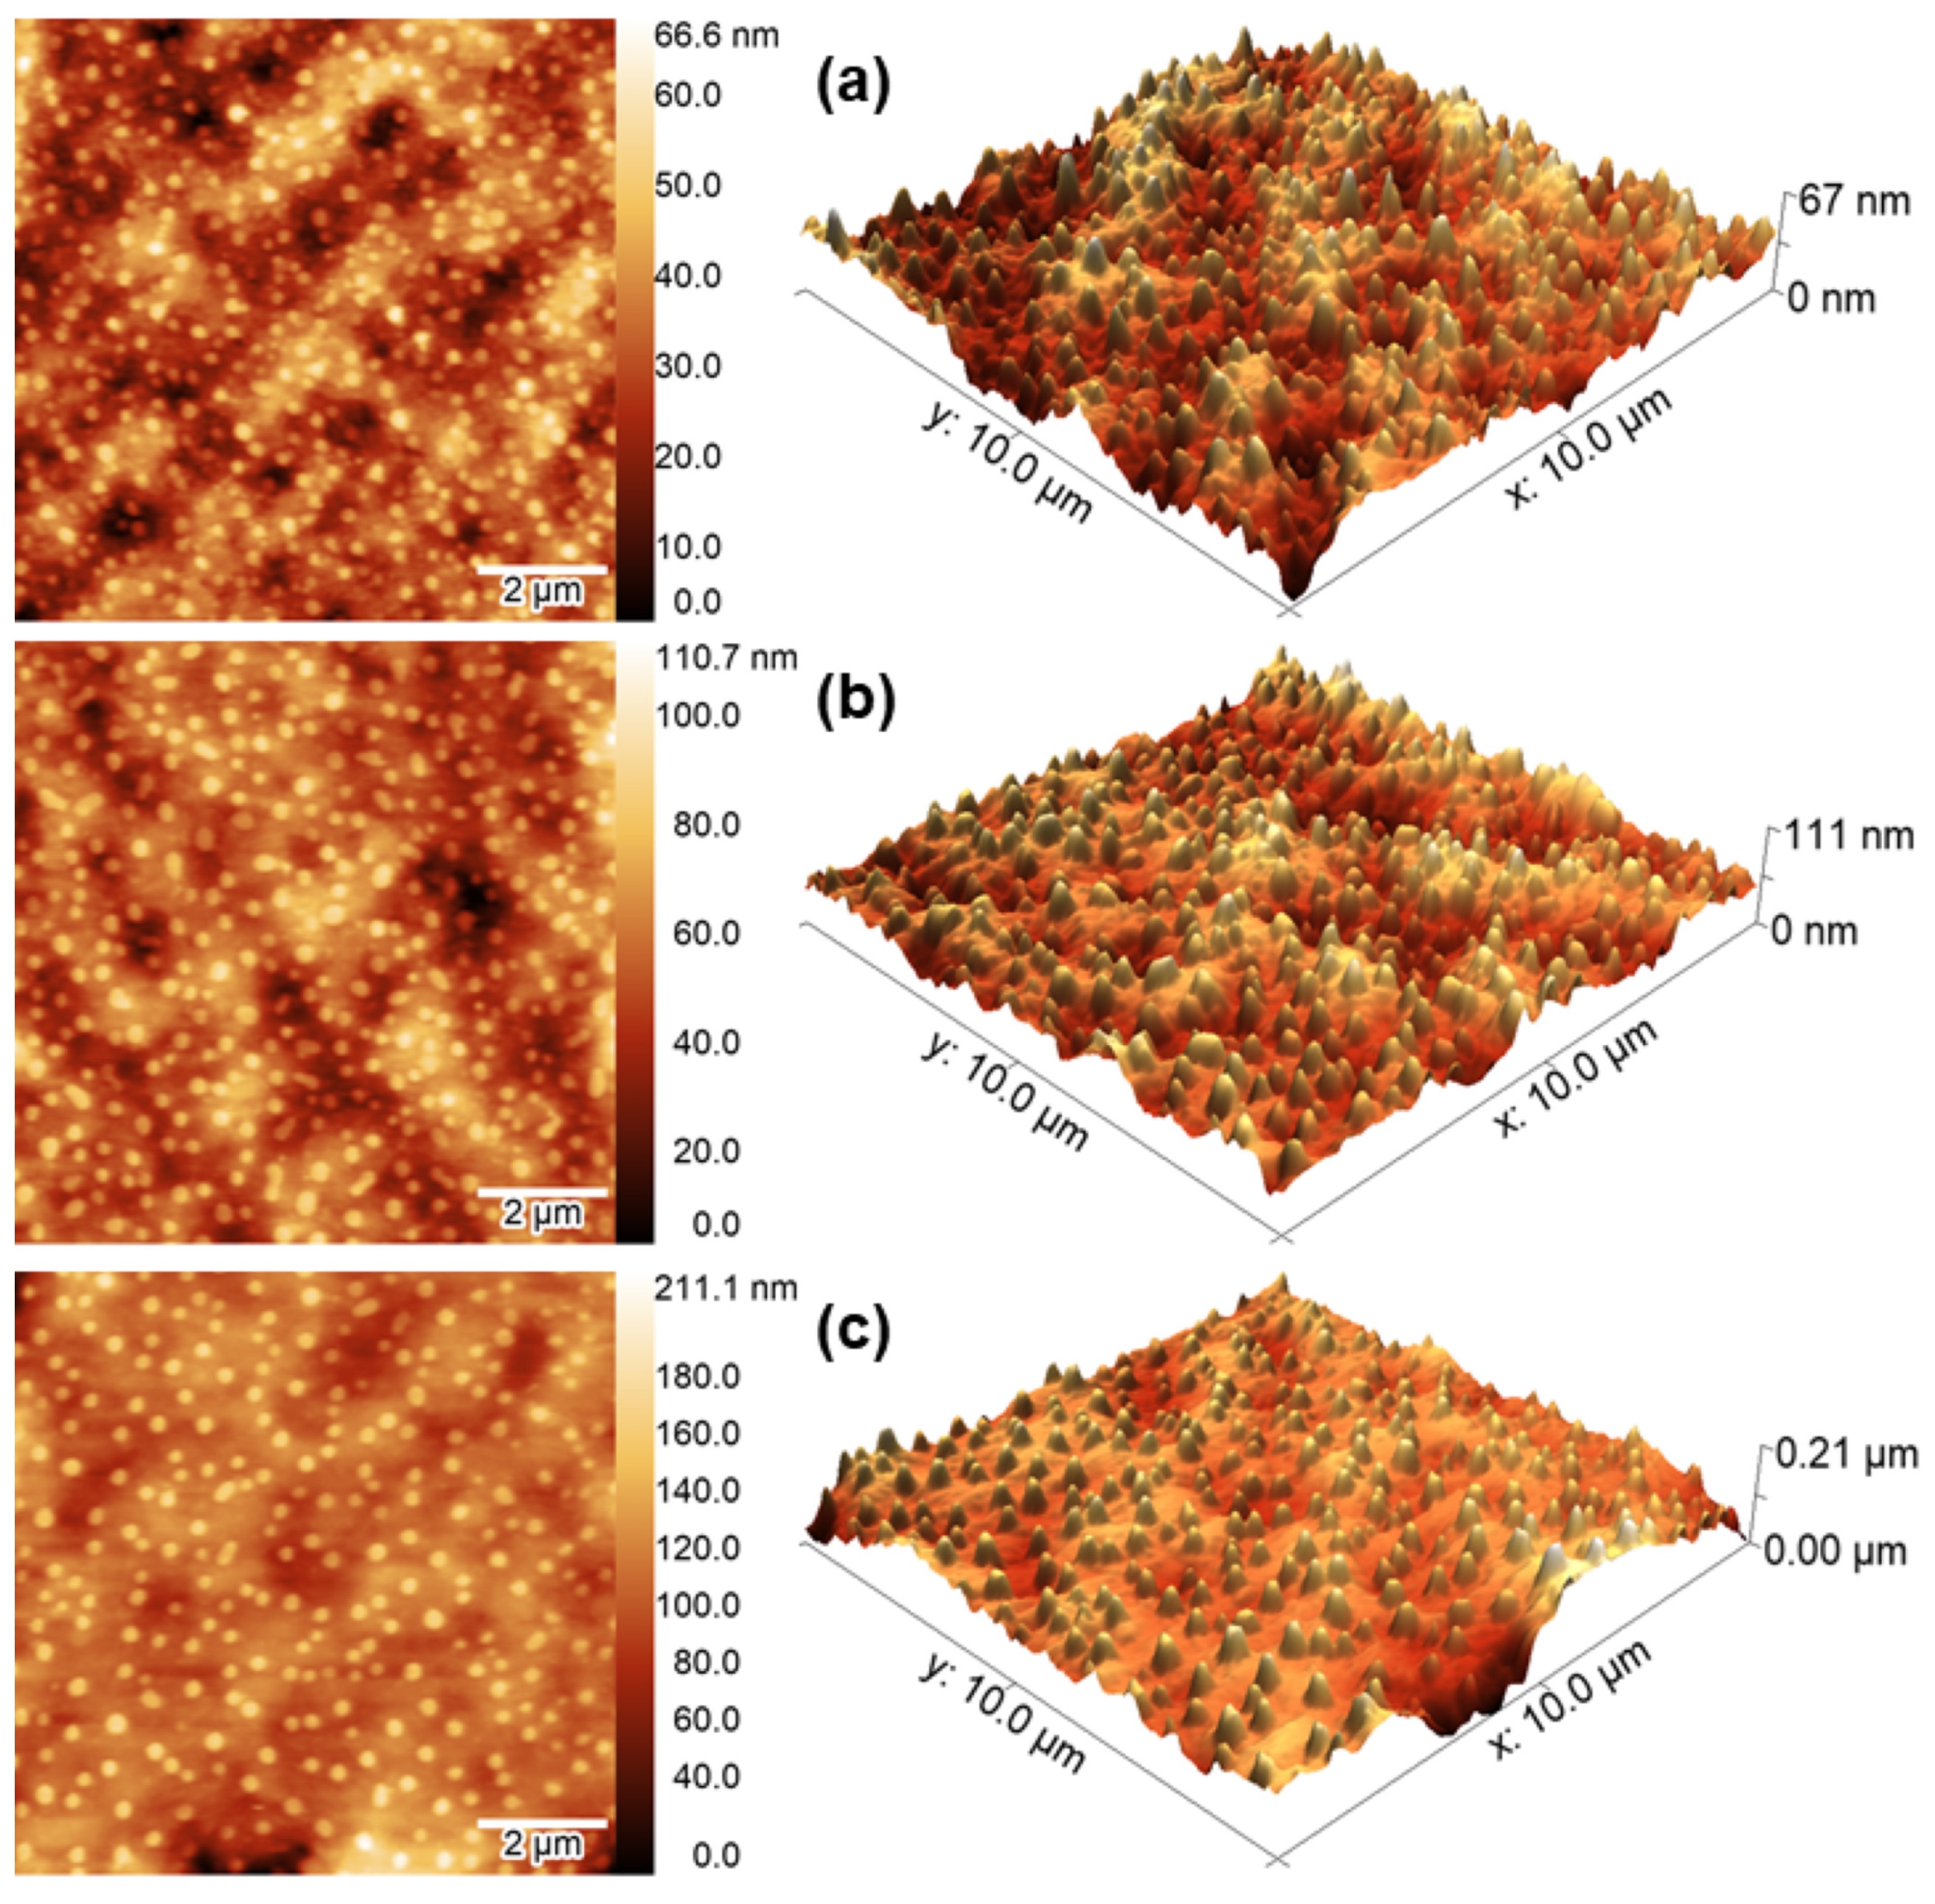 Three-dimensional nanoscale morphological surface analysis of polymeric particles containing Allium sativum essential oil.